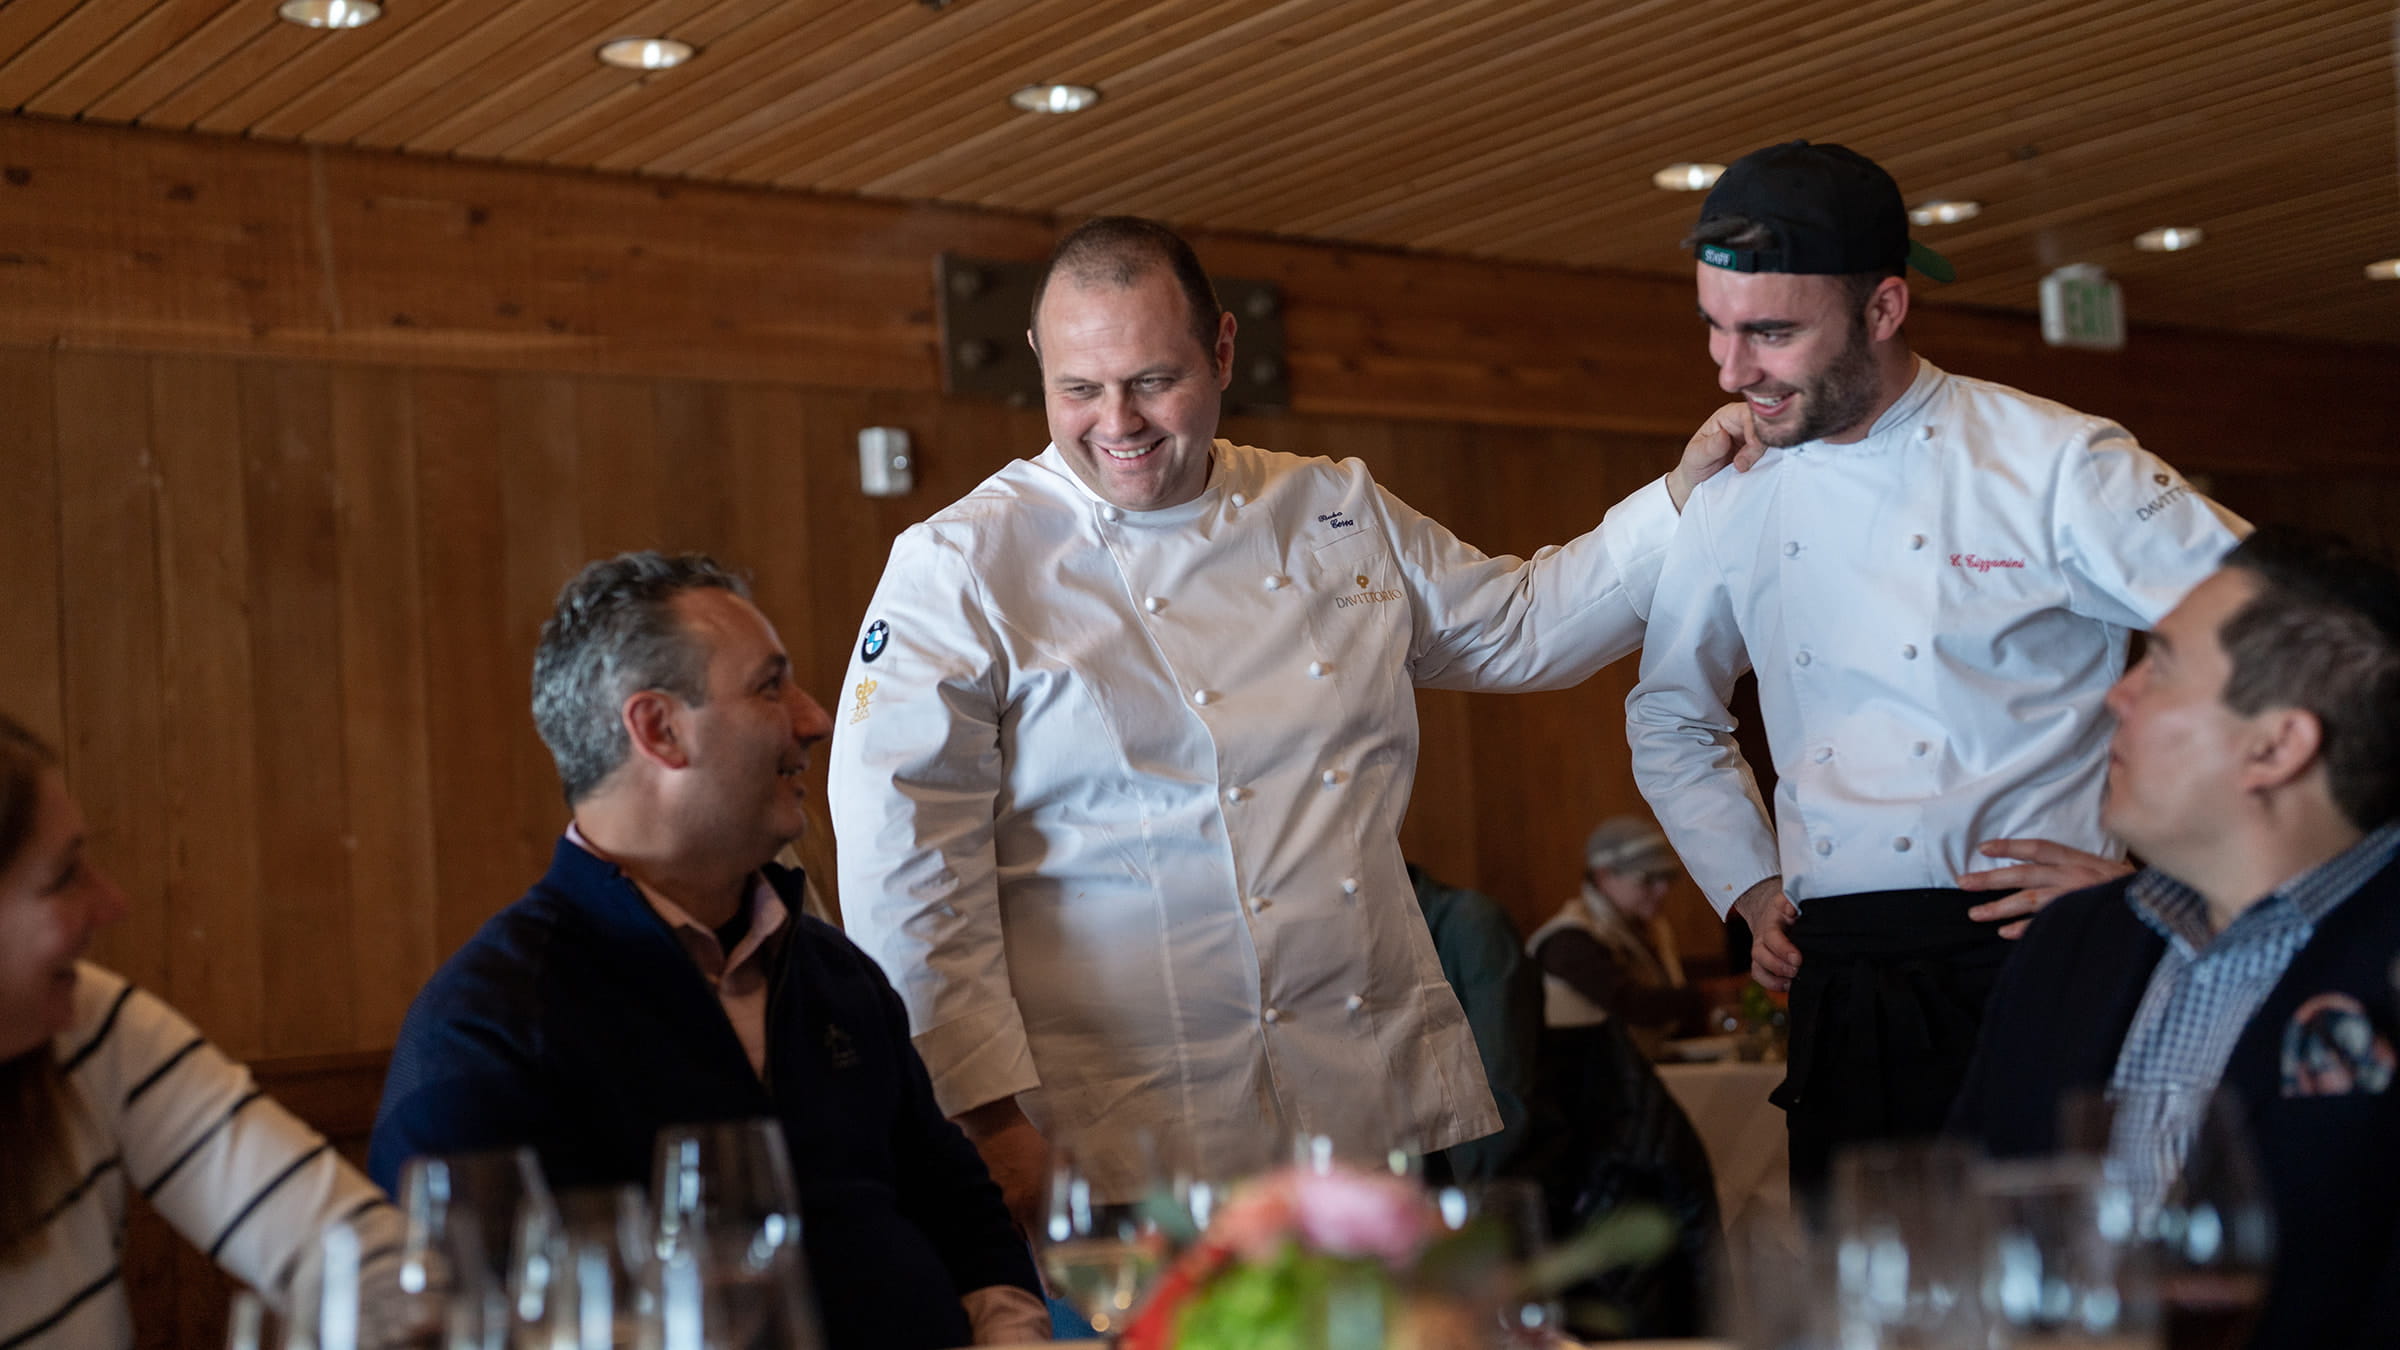 Chef Roberto Cerea talking with guests at the Taste of Luxury event.